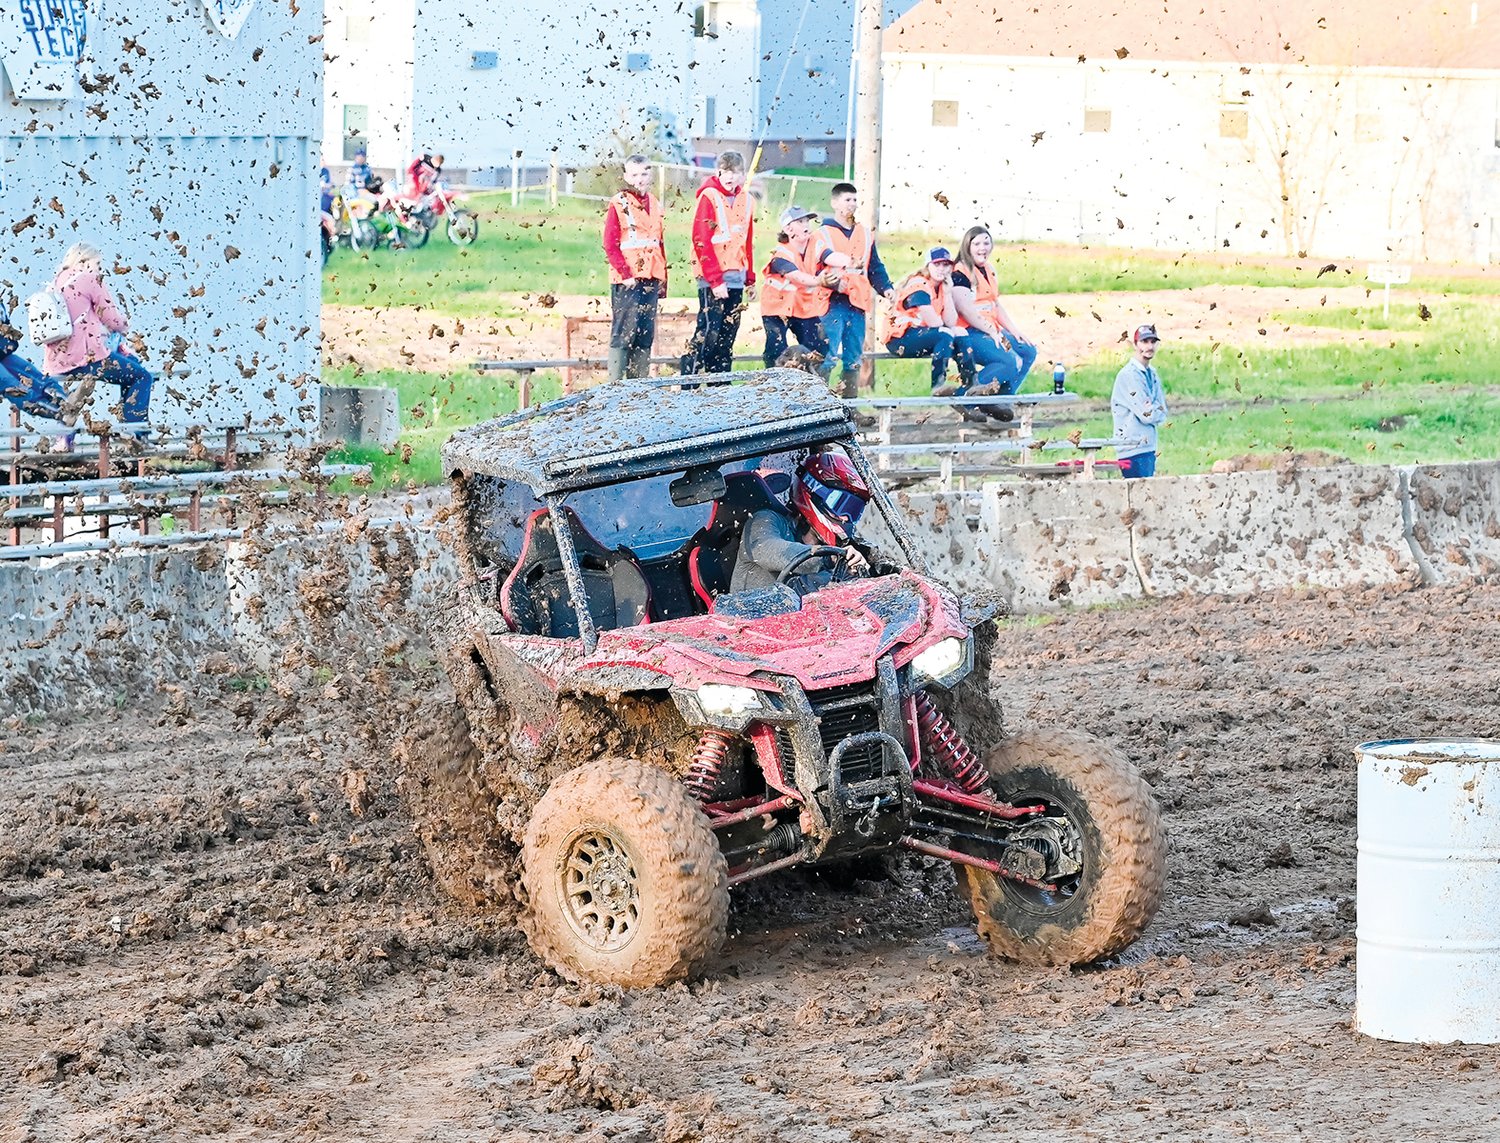 The Linn Wildcat Football Club’s first-ever ATV/UTV and Dirt Bike Rodeo on Friday was a huge success and helped raise money to purchase football equipment this year. A total of 77 racers entered the event, which featured barrels, pole-bending, and keyhole racing.